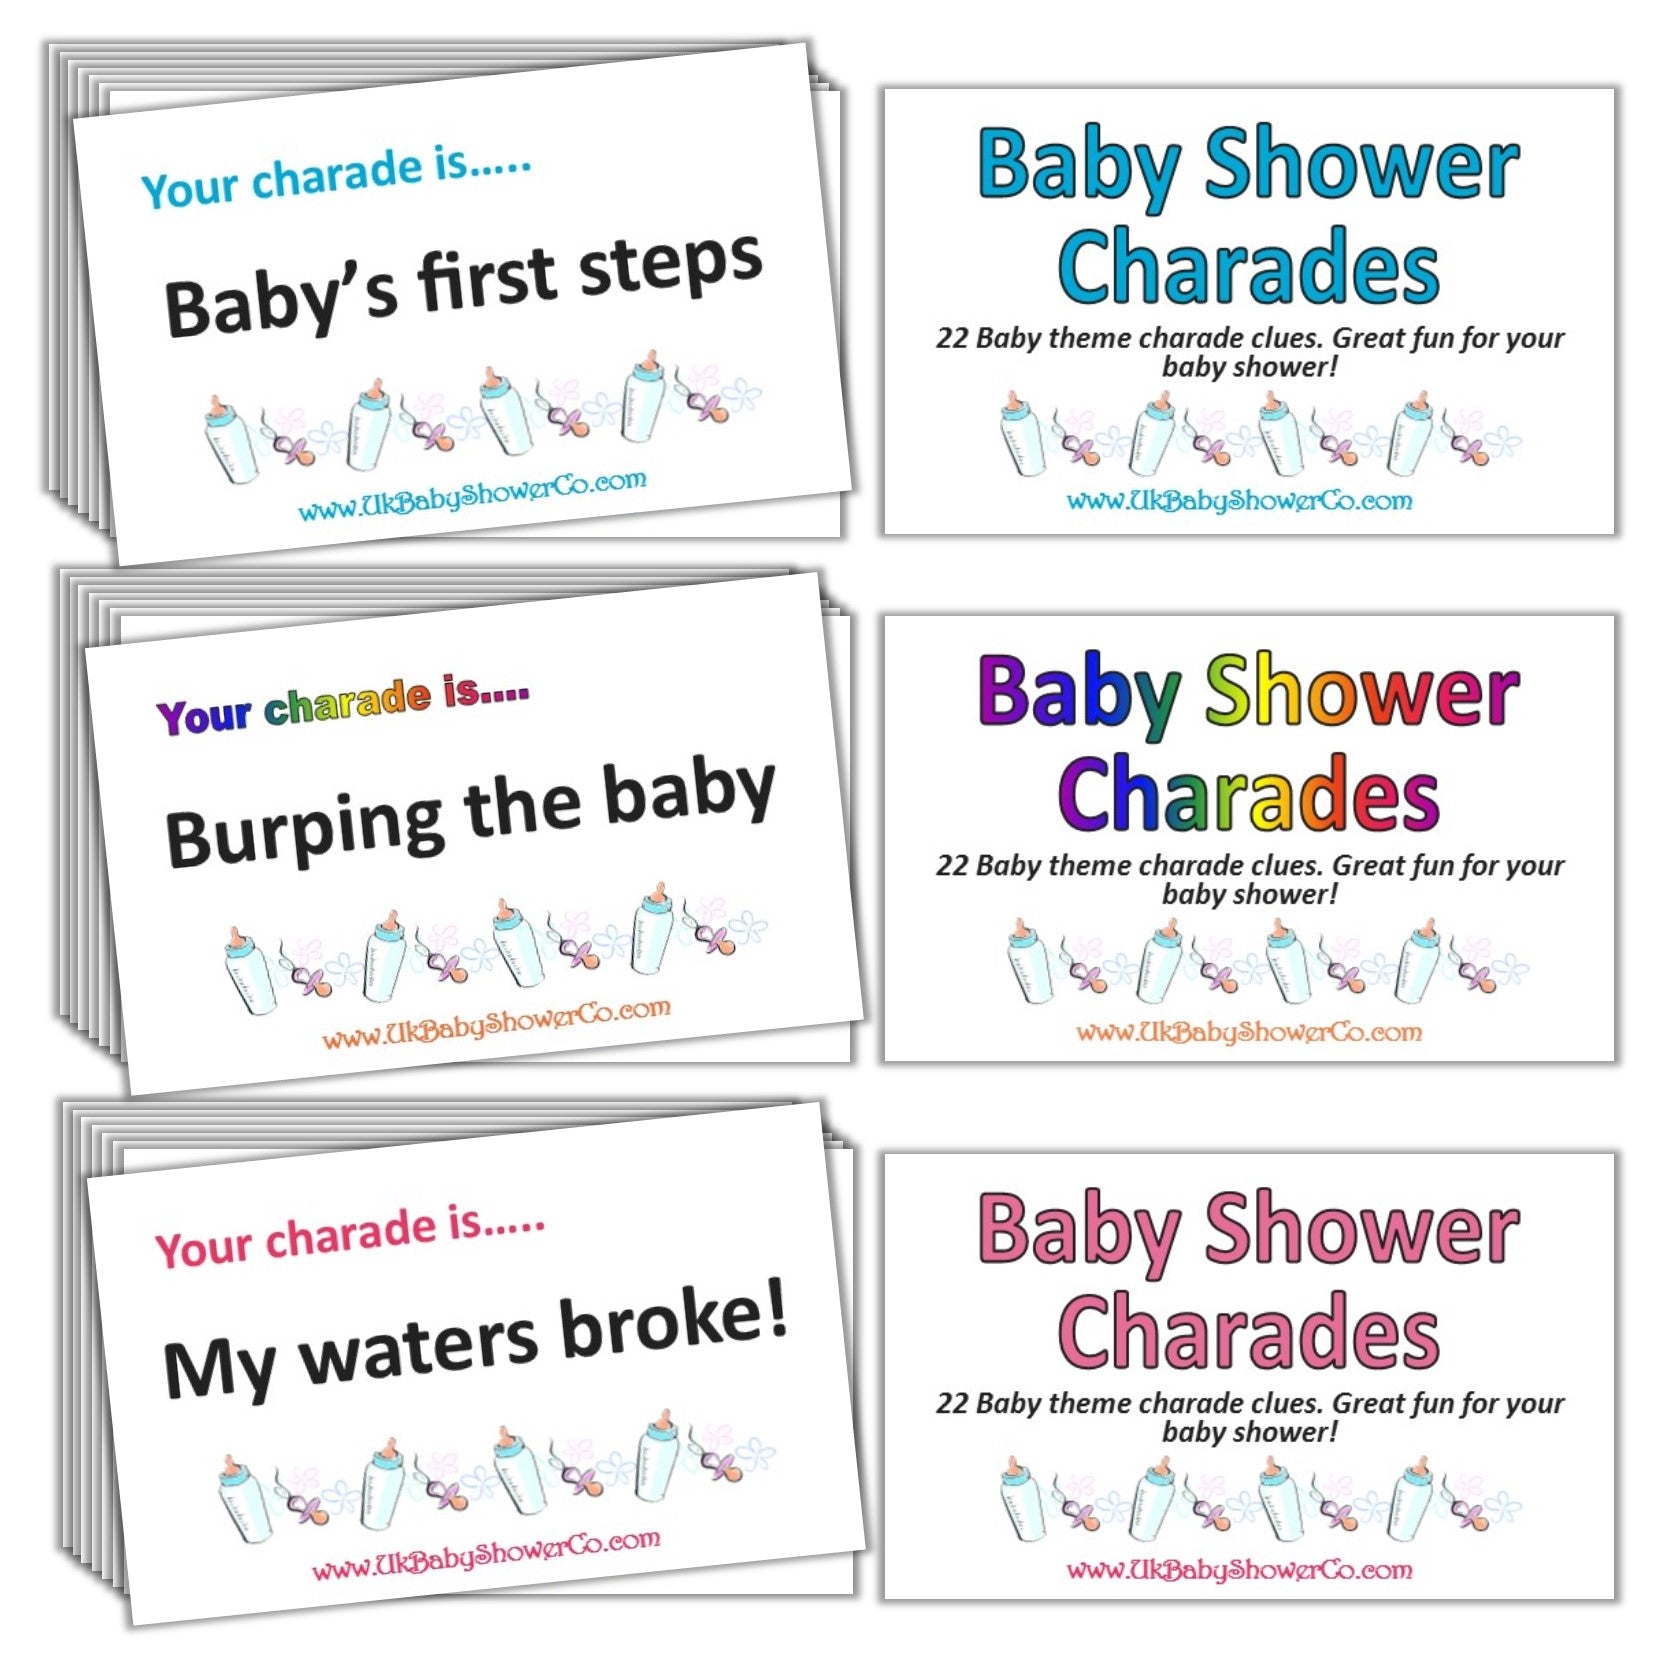 Baby Shower Charades Game - Uk Baby Shower Co ltd